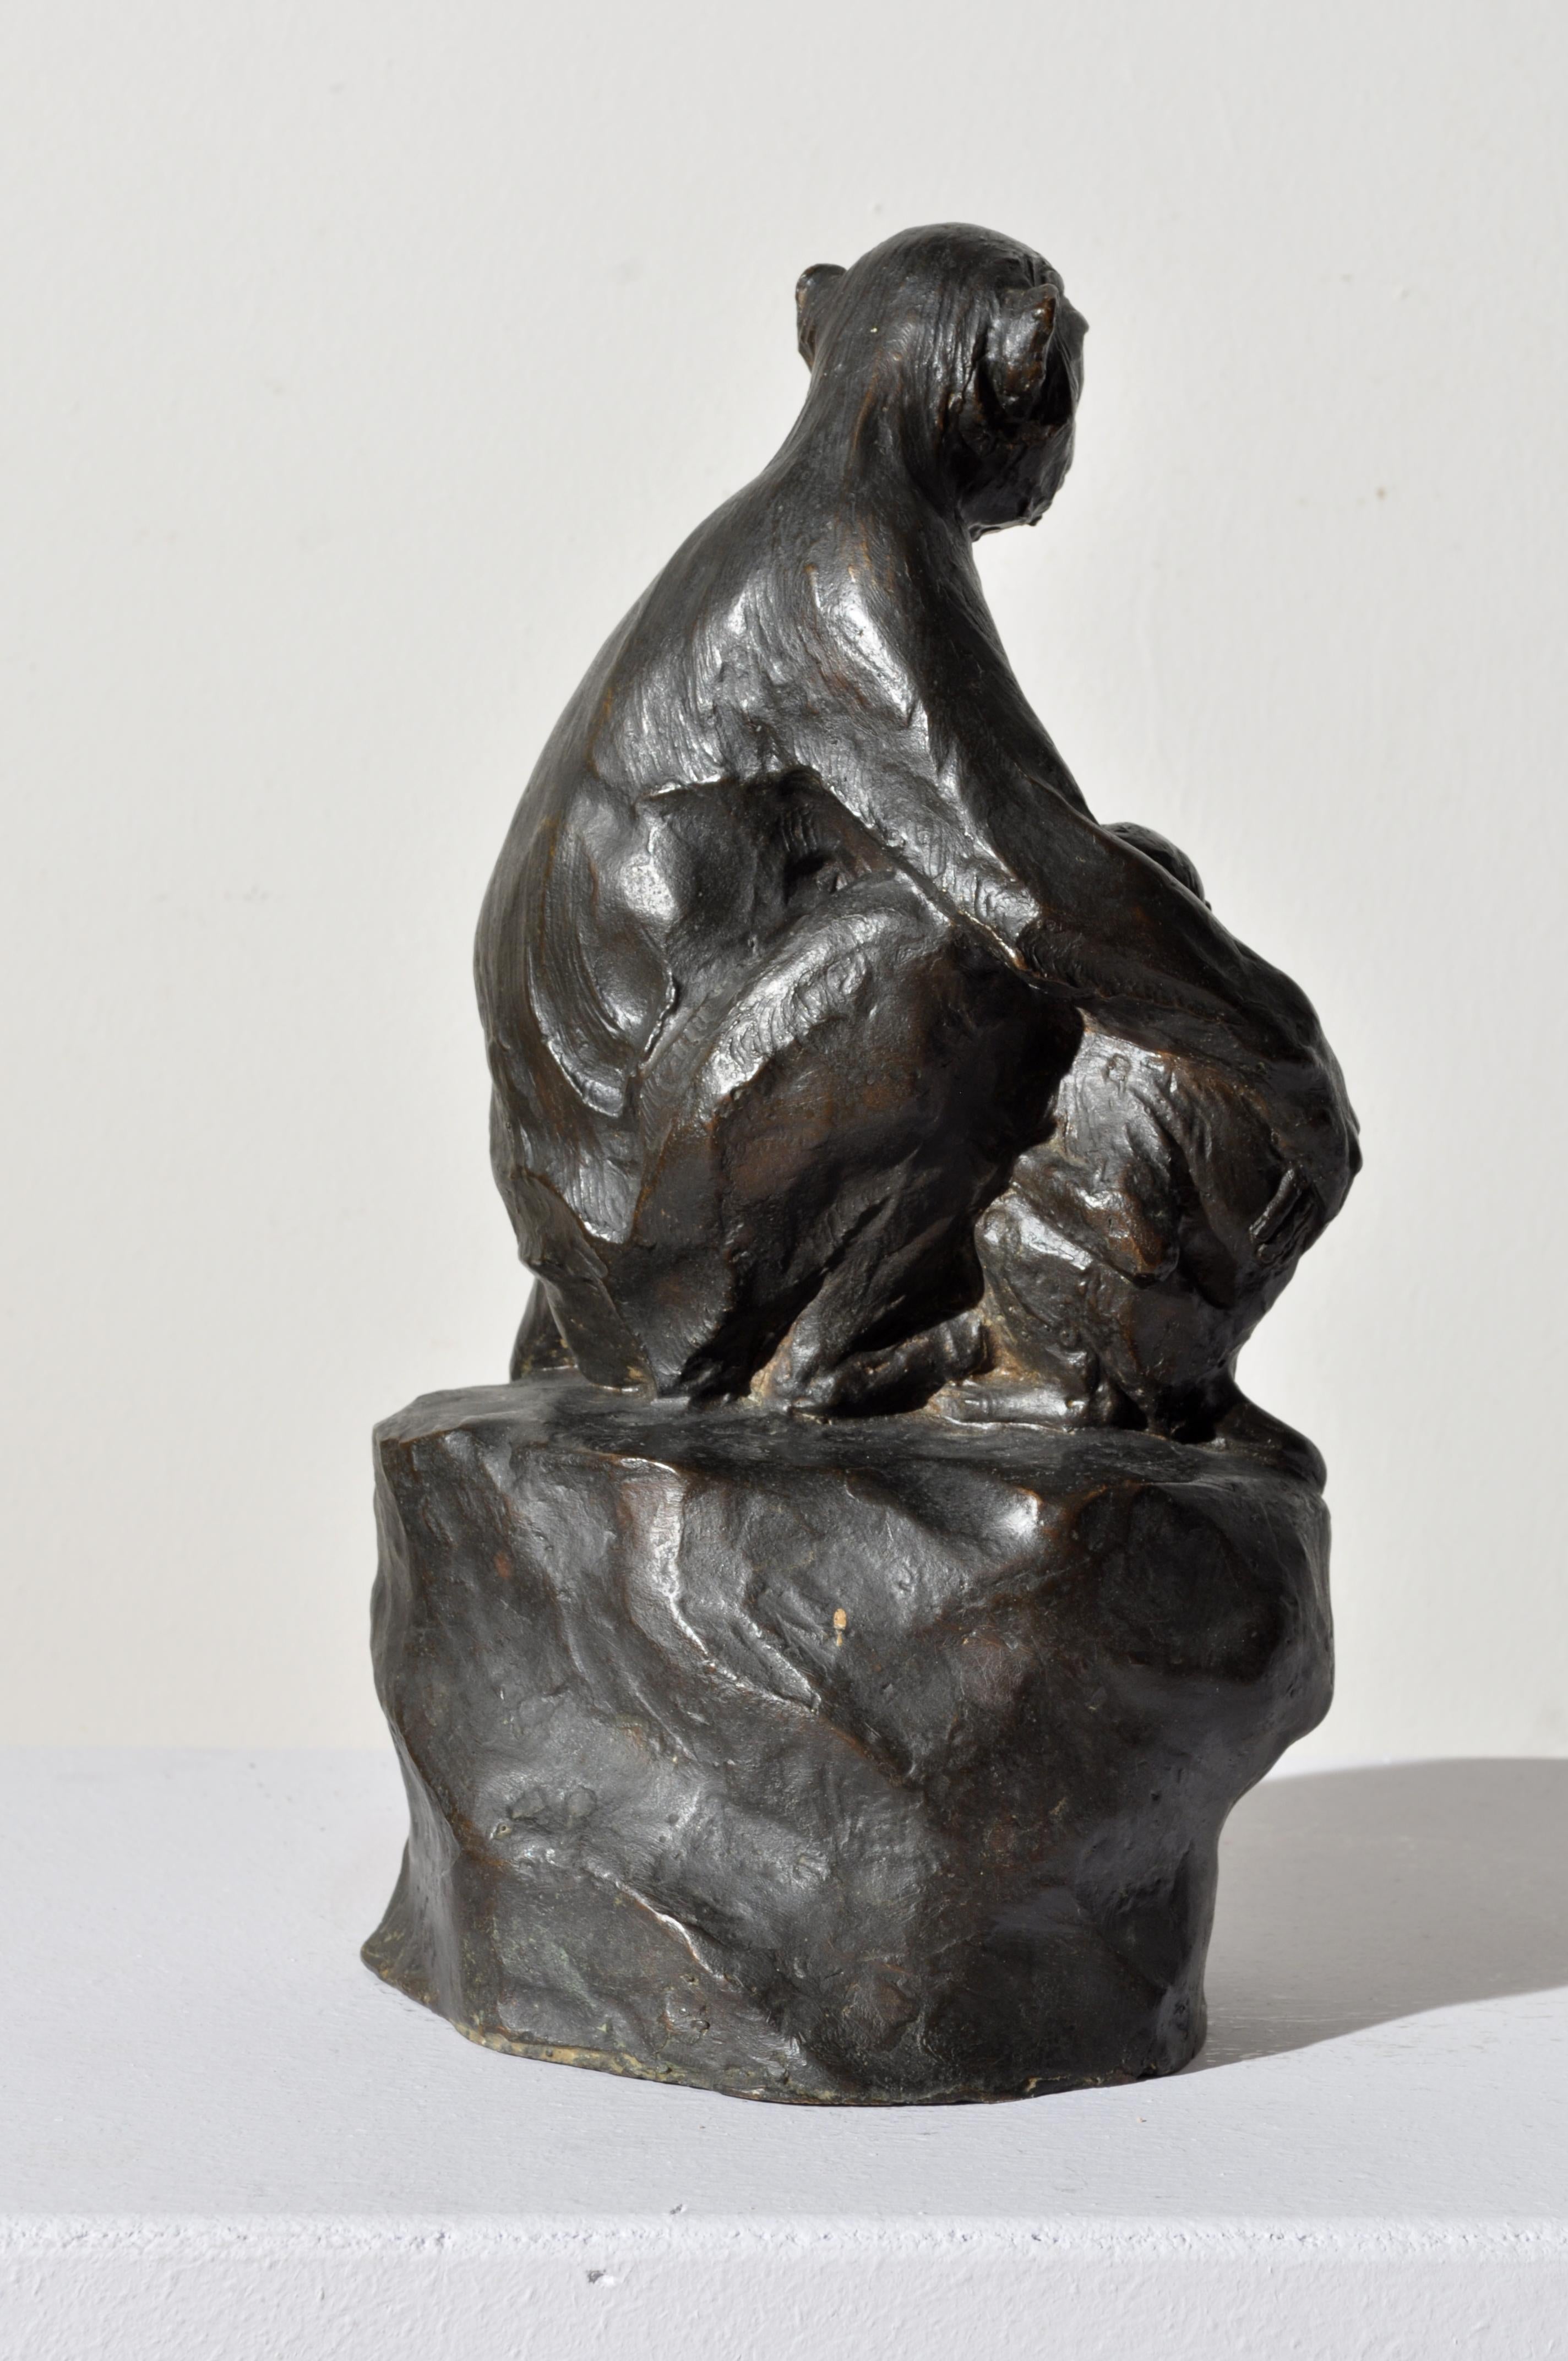 FERDINANDO VICHI
(Florence, 1875 - 1941)

Macaques, circa 1910
bronze, height 32 cm

Signed at the base 